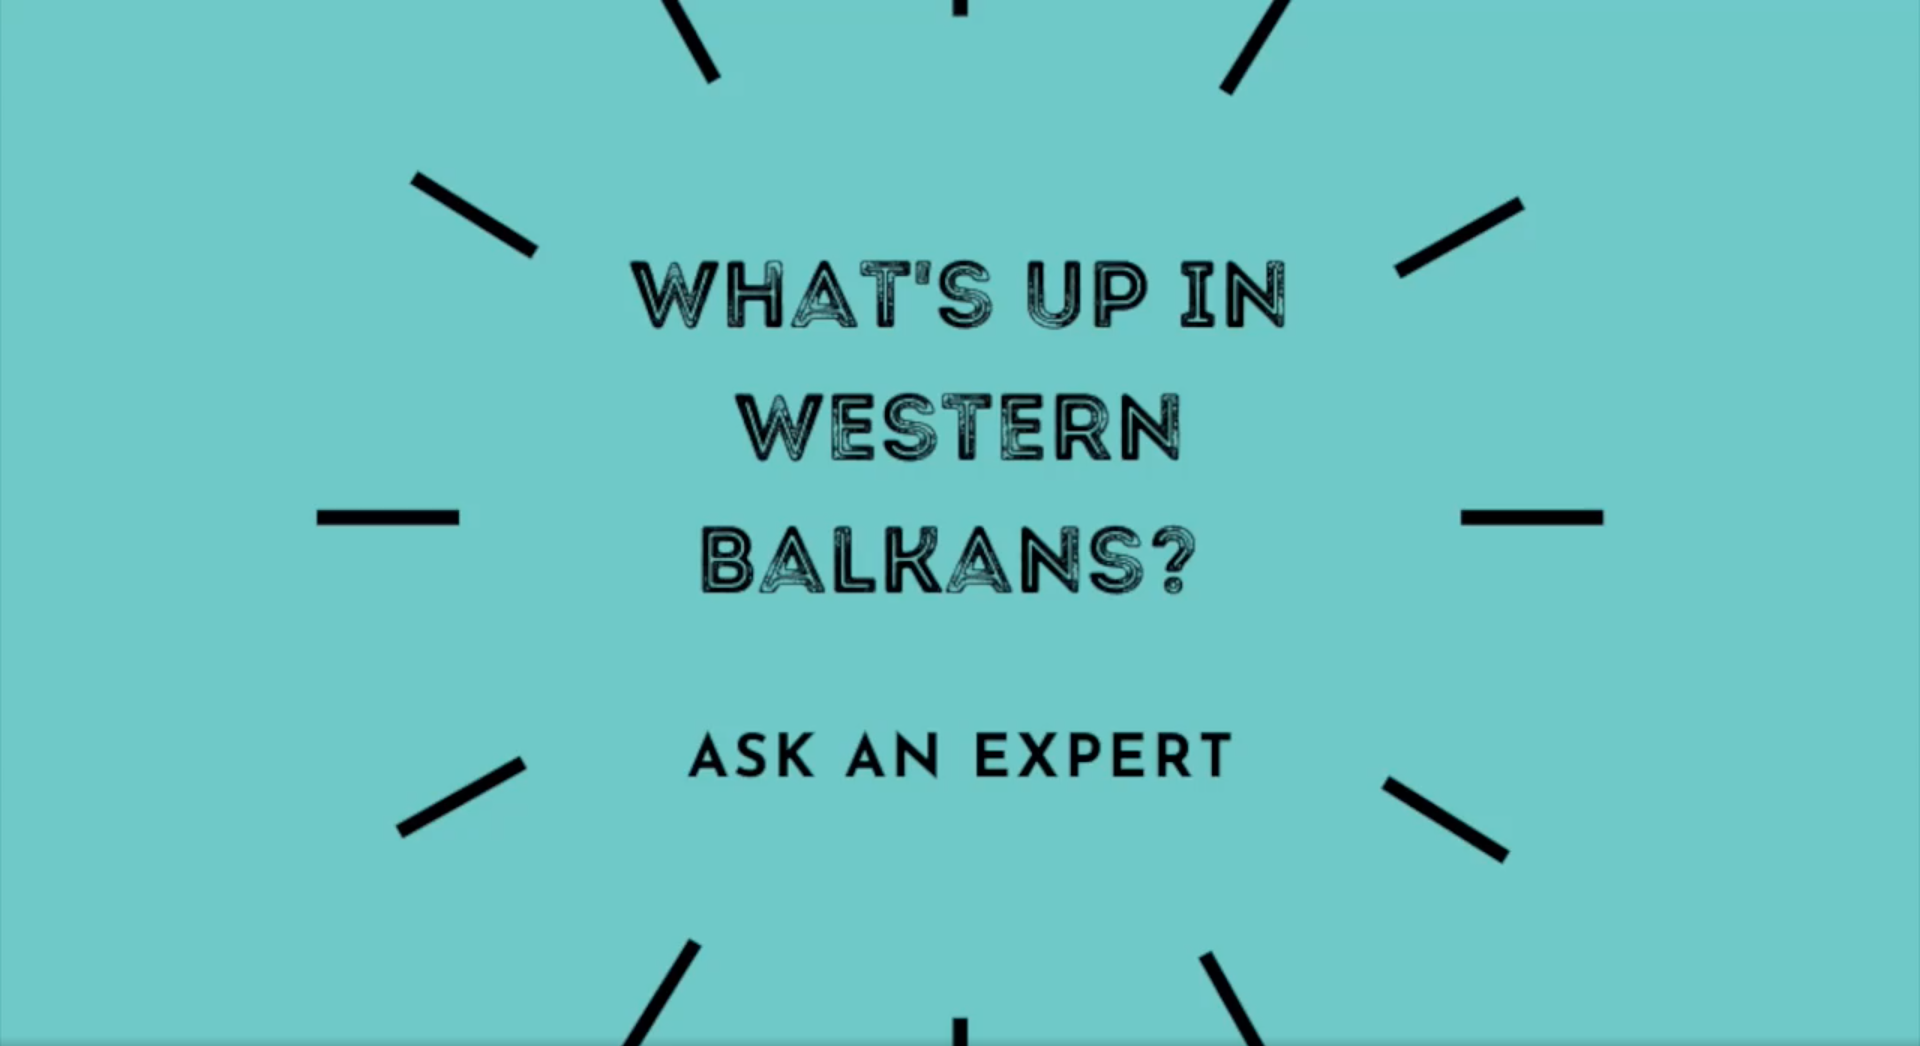 Watch: What’s Up in Western Balkans? Ask an Expert.